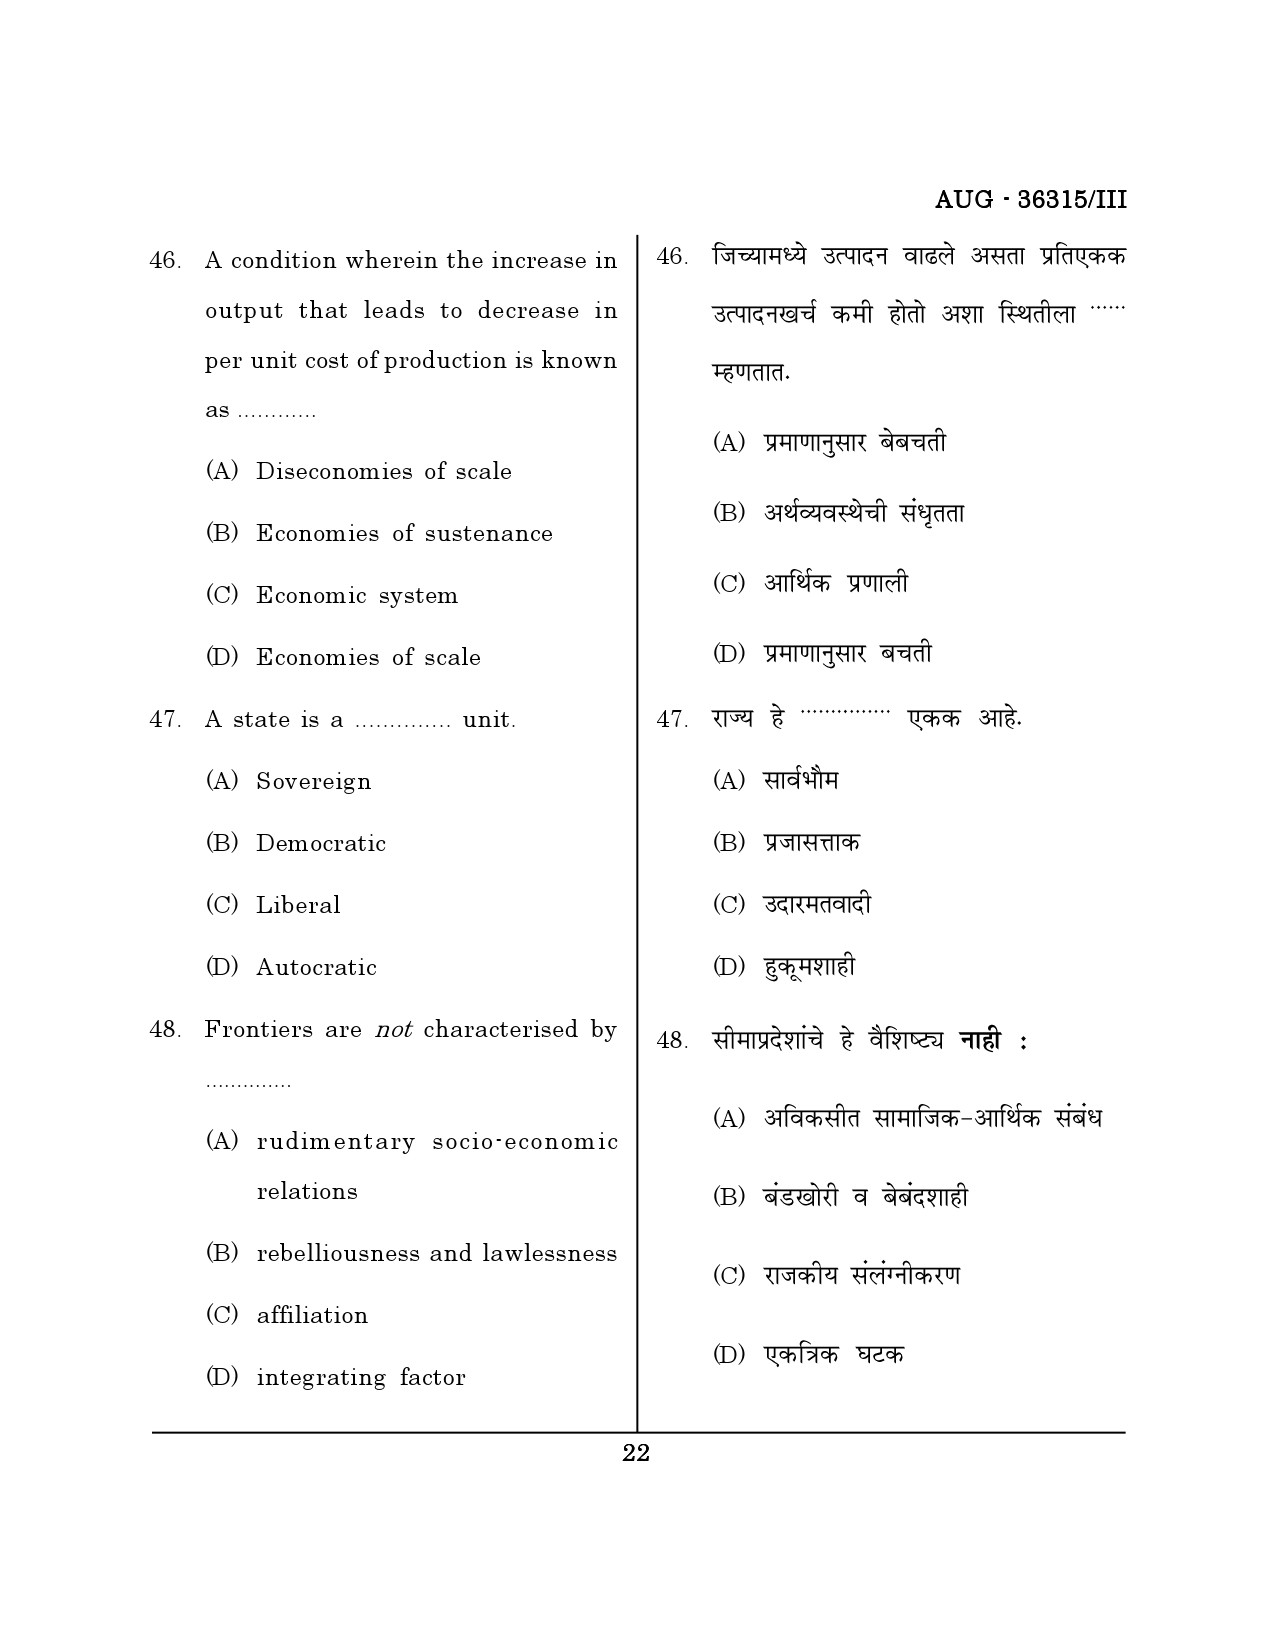 Maharashtra SET Geography Question Paper III August 2015 21